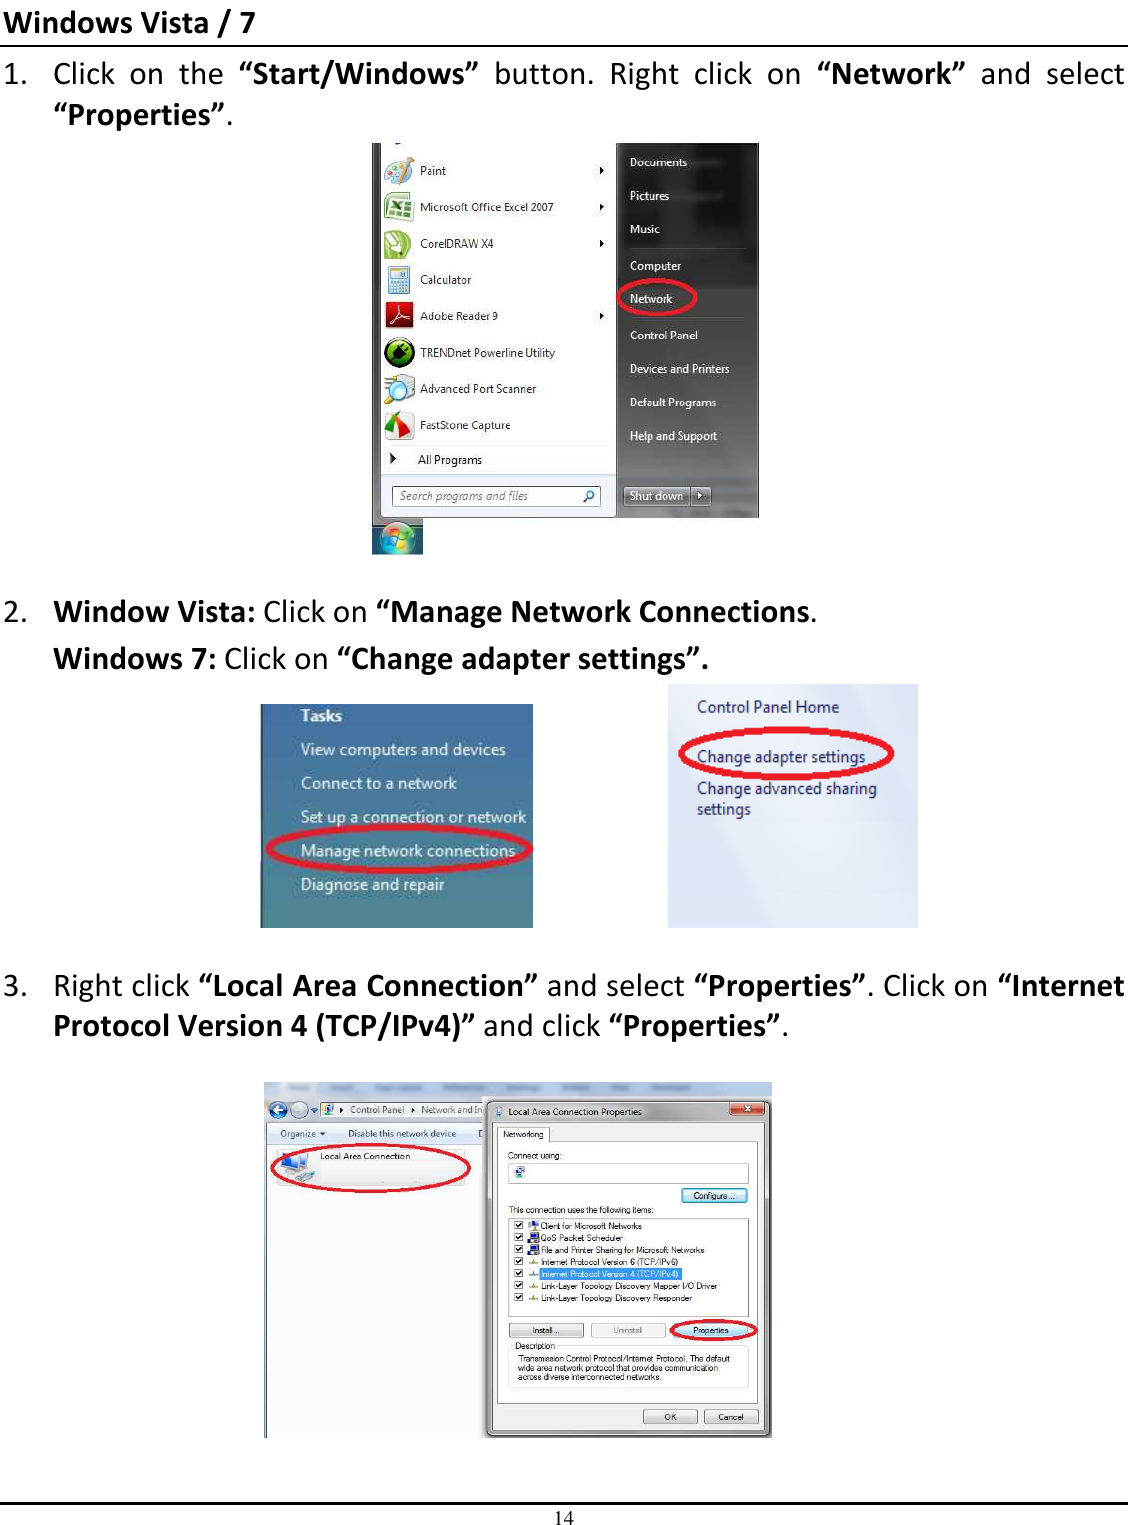 14  Windows Vista / 7 1. Click  on  the  “Start/Windows”  button.  Right  click  on  “Network”  and  select “Properties”.    2. Window Vista: Click on “Manage Network Connections.  Windows 7: Click on “Change adapter settings”.         3. Right click “Local Area Connection” and select “Properties”. Click on “Internet Protocol Version 4 (TCP/IPv4)” and click “Properties”.        